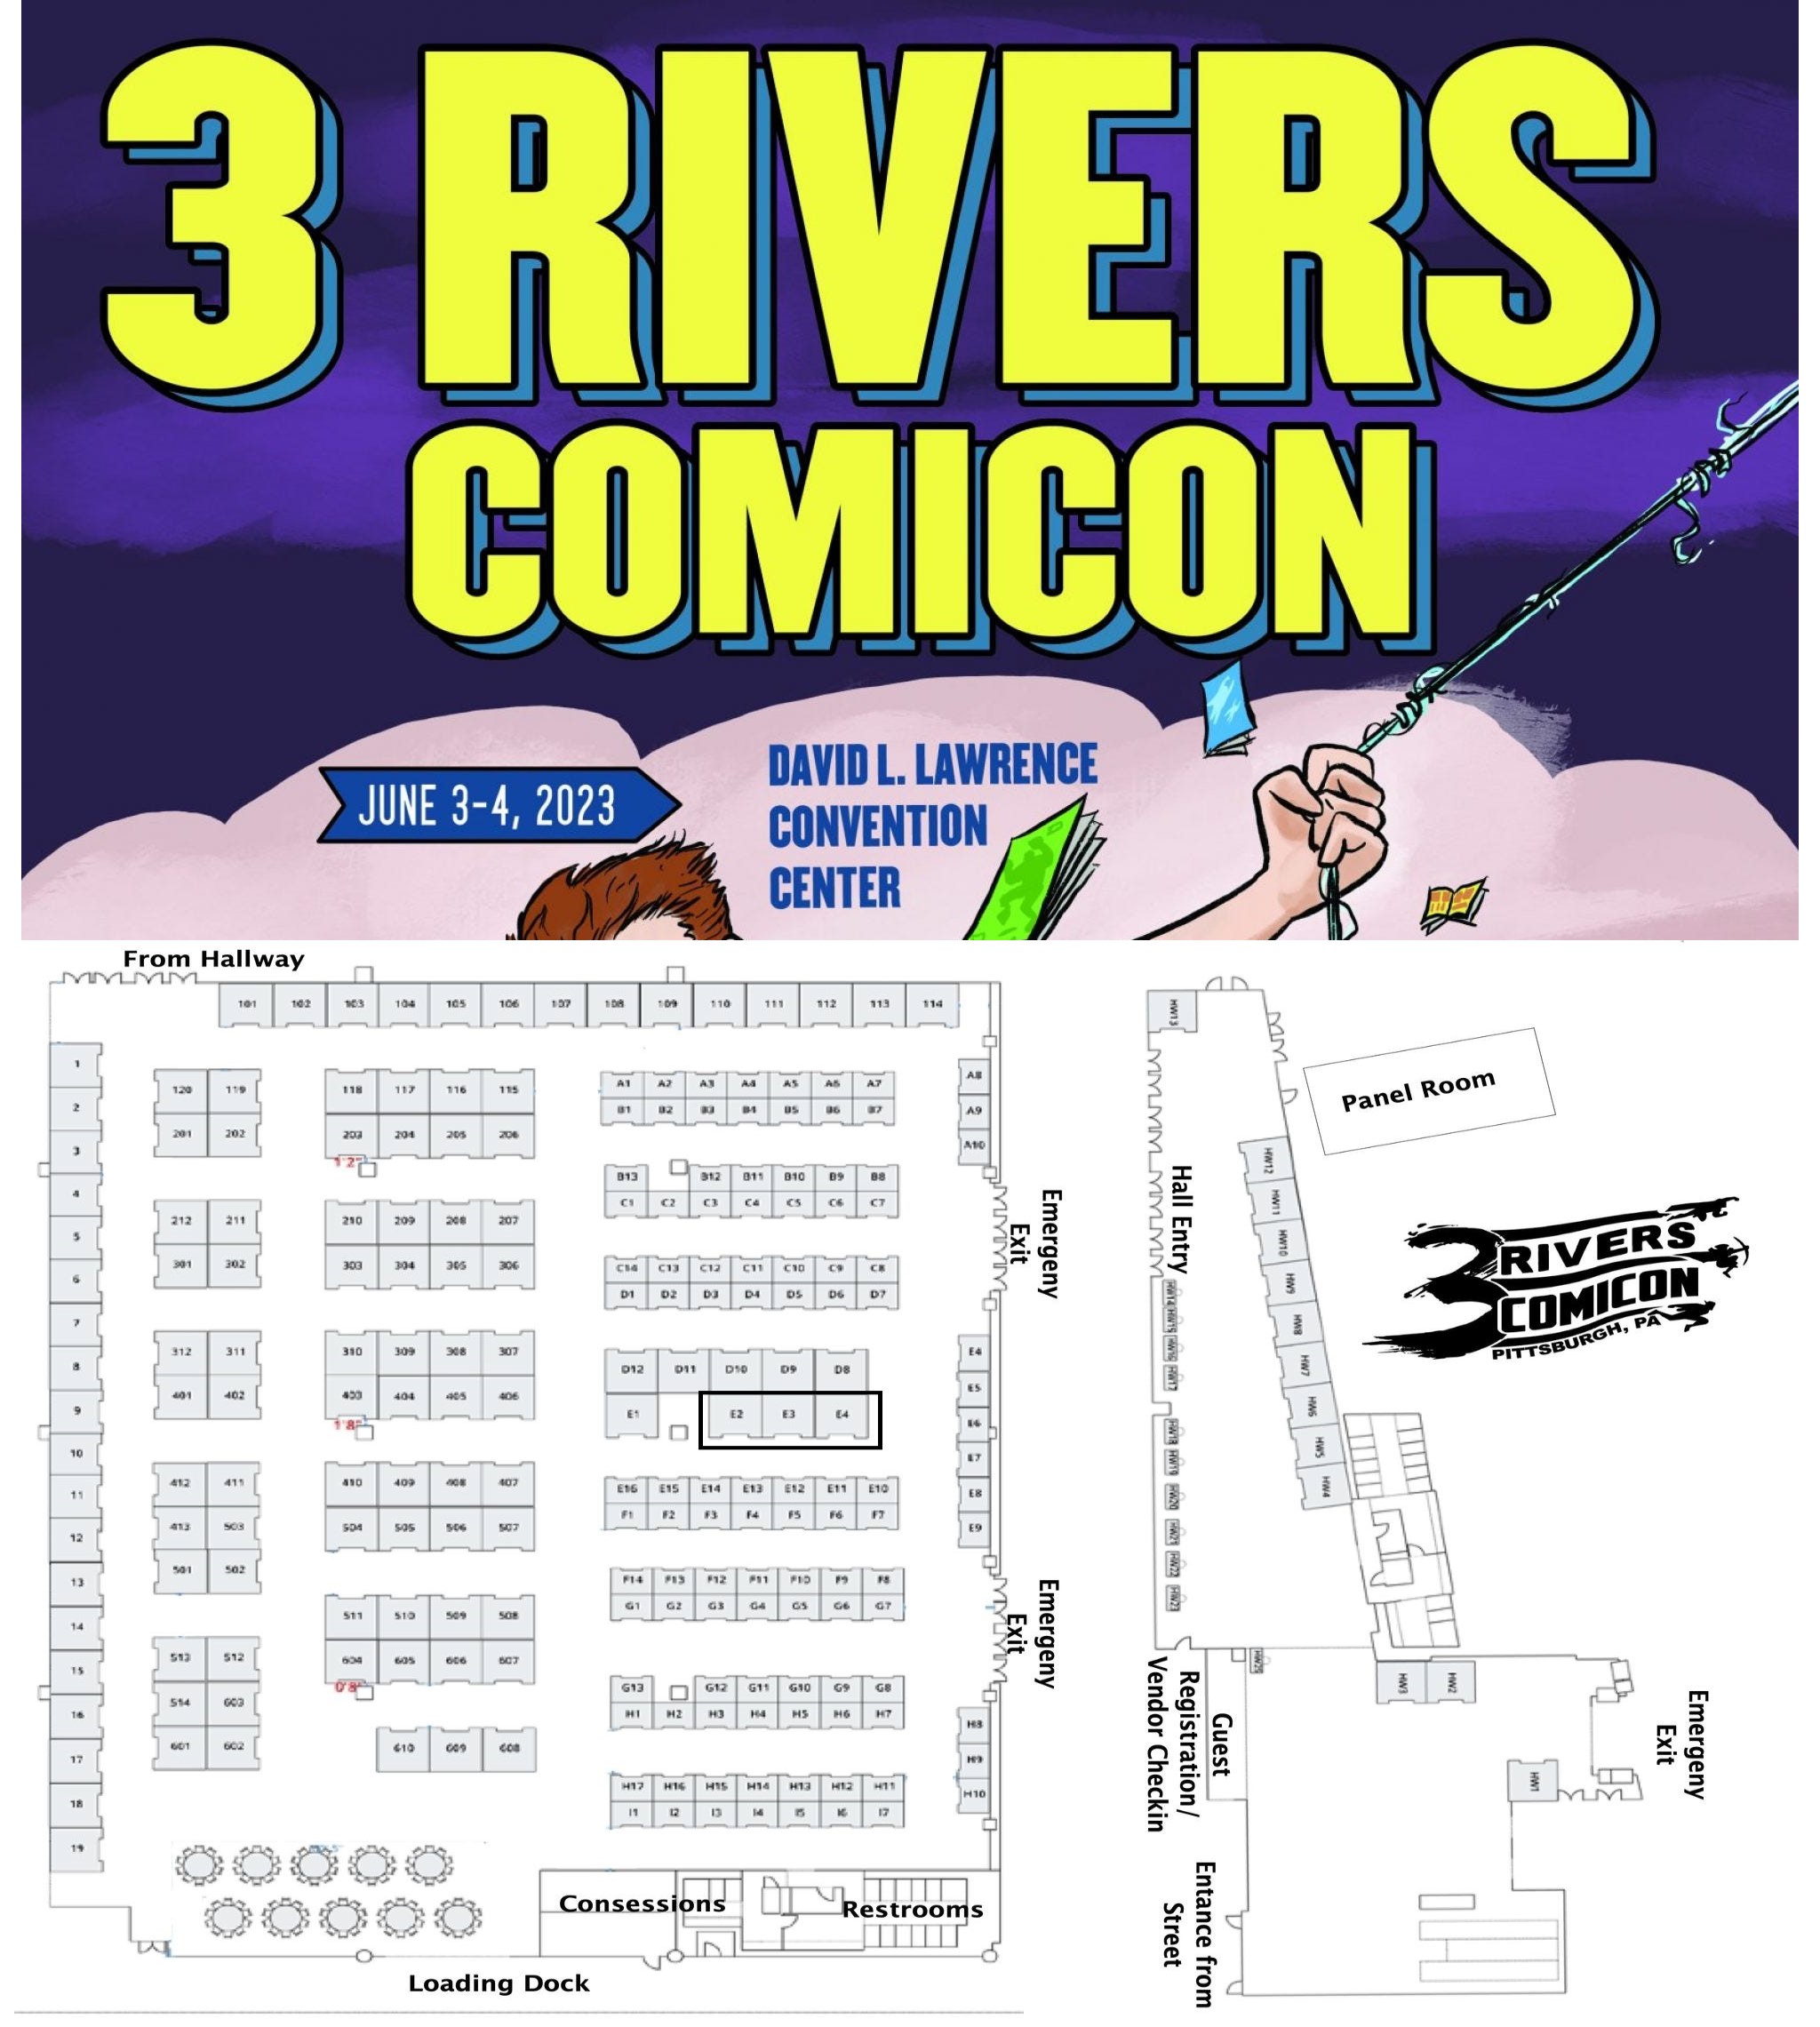 3 rivers comic combined graphic.jpg